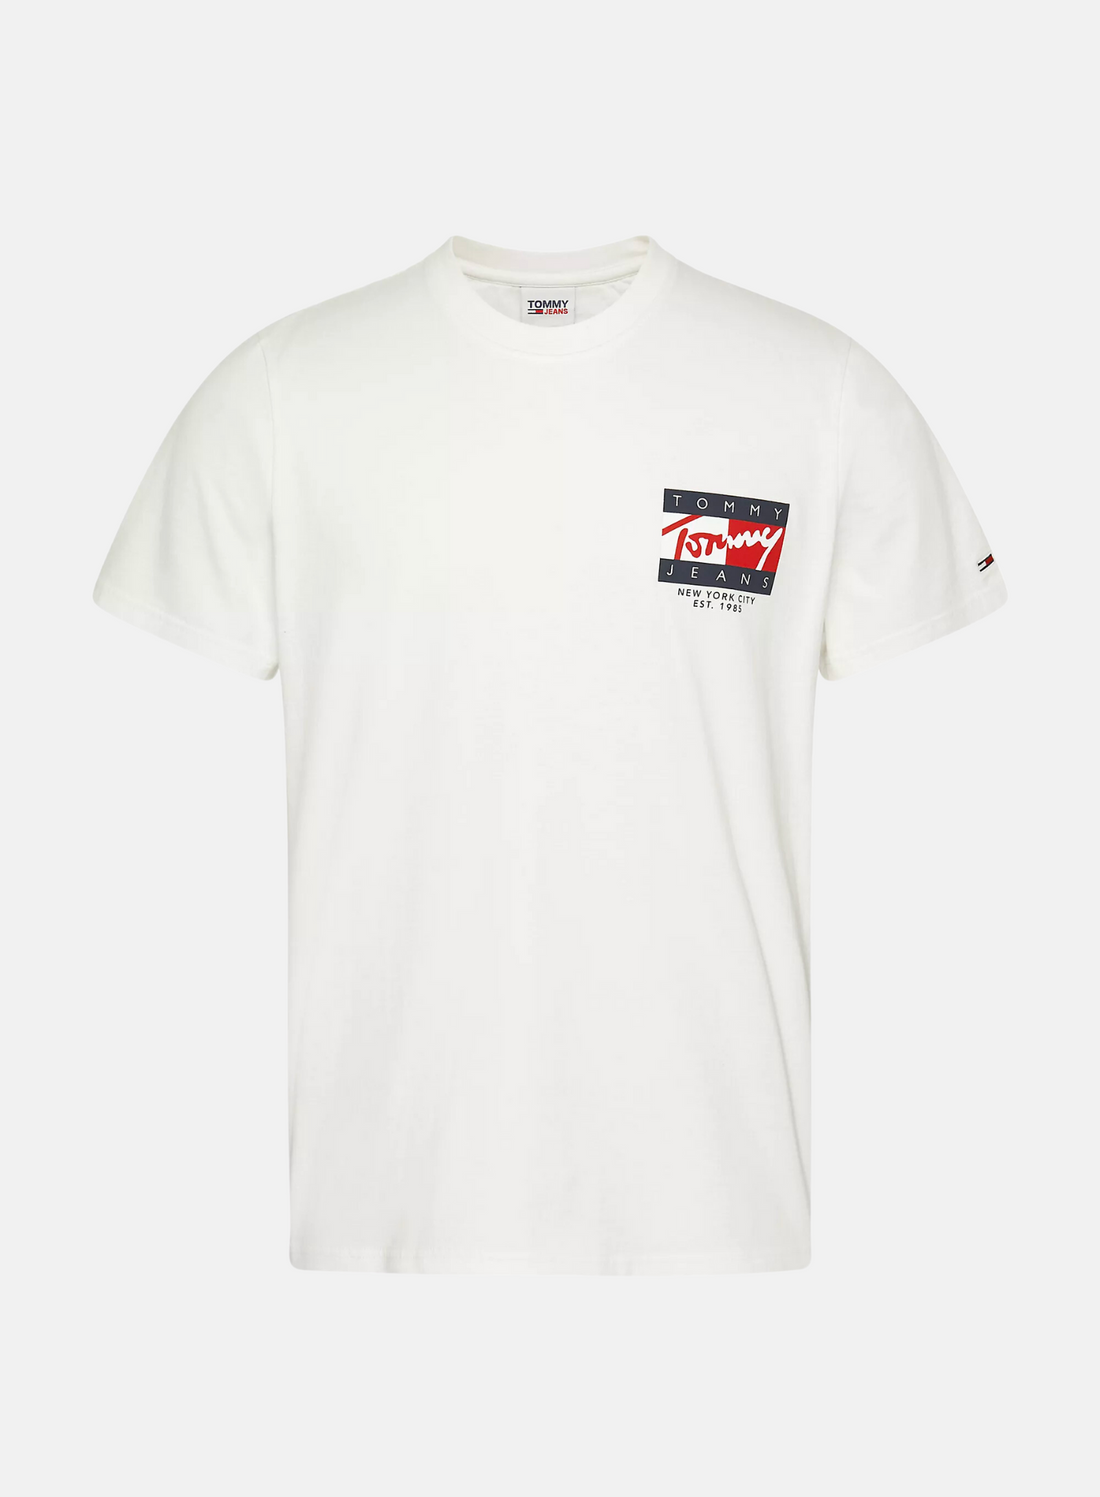 Tommy Jeans Vintage Flag Signature Tee - Hympala Store 